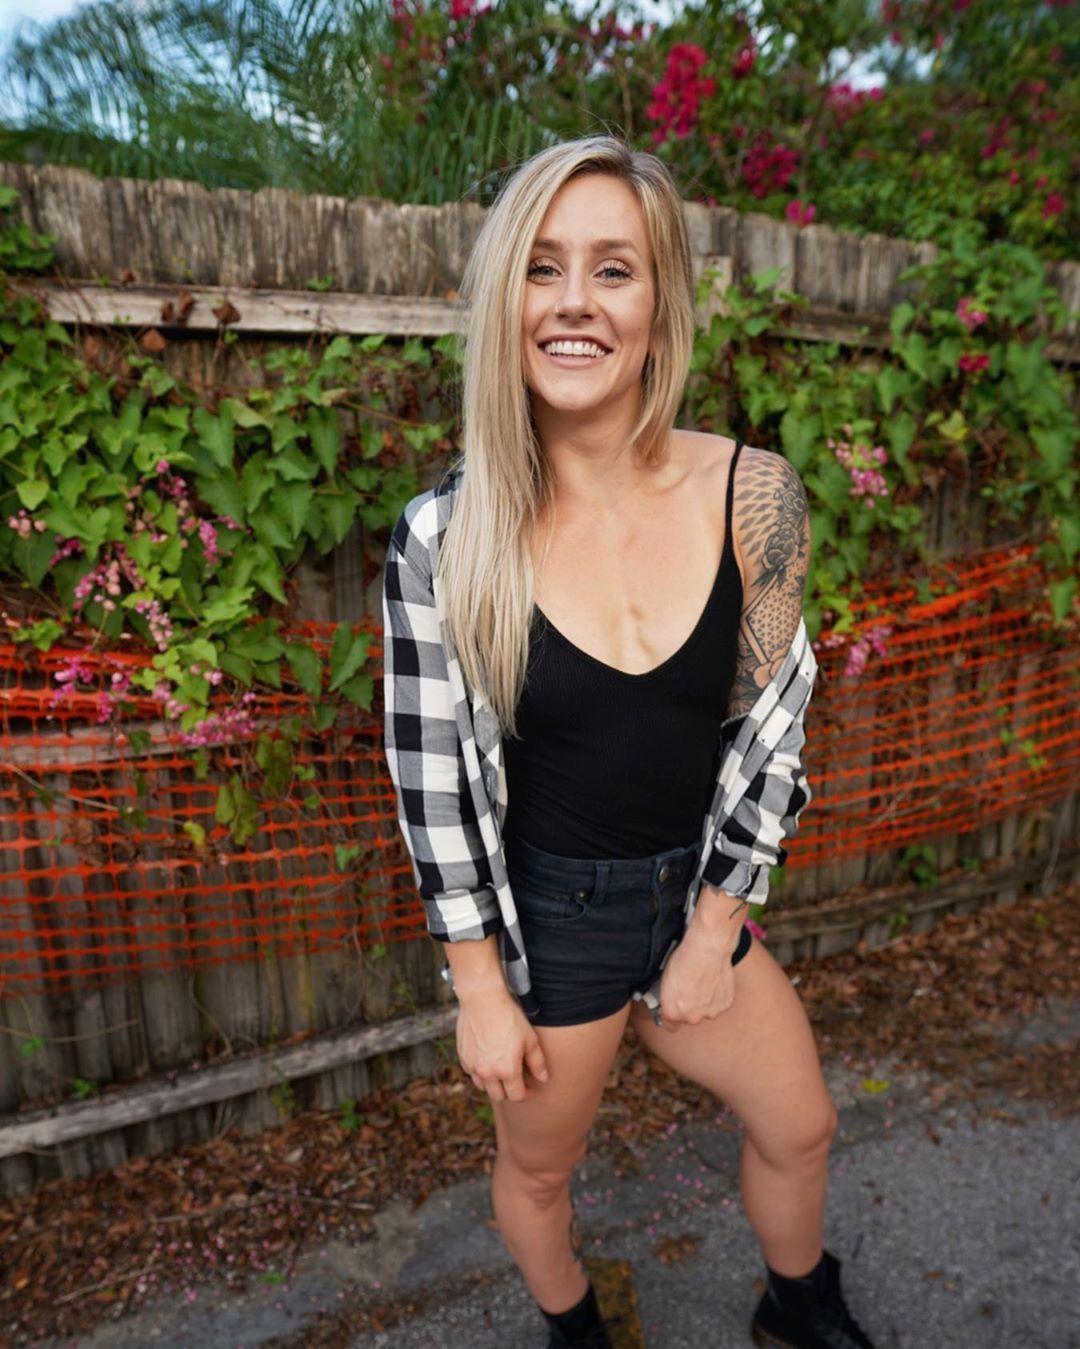 51 Hot Pictures Of Josie Hamming That Will Fill Your Heart With Joy A Success | Best Of Comic Books